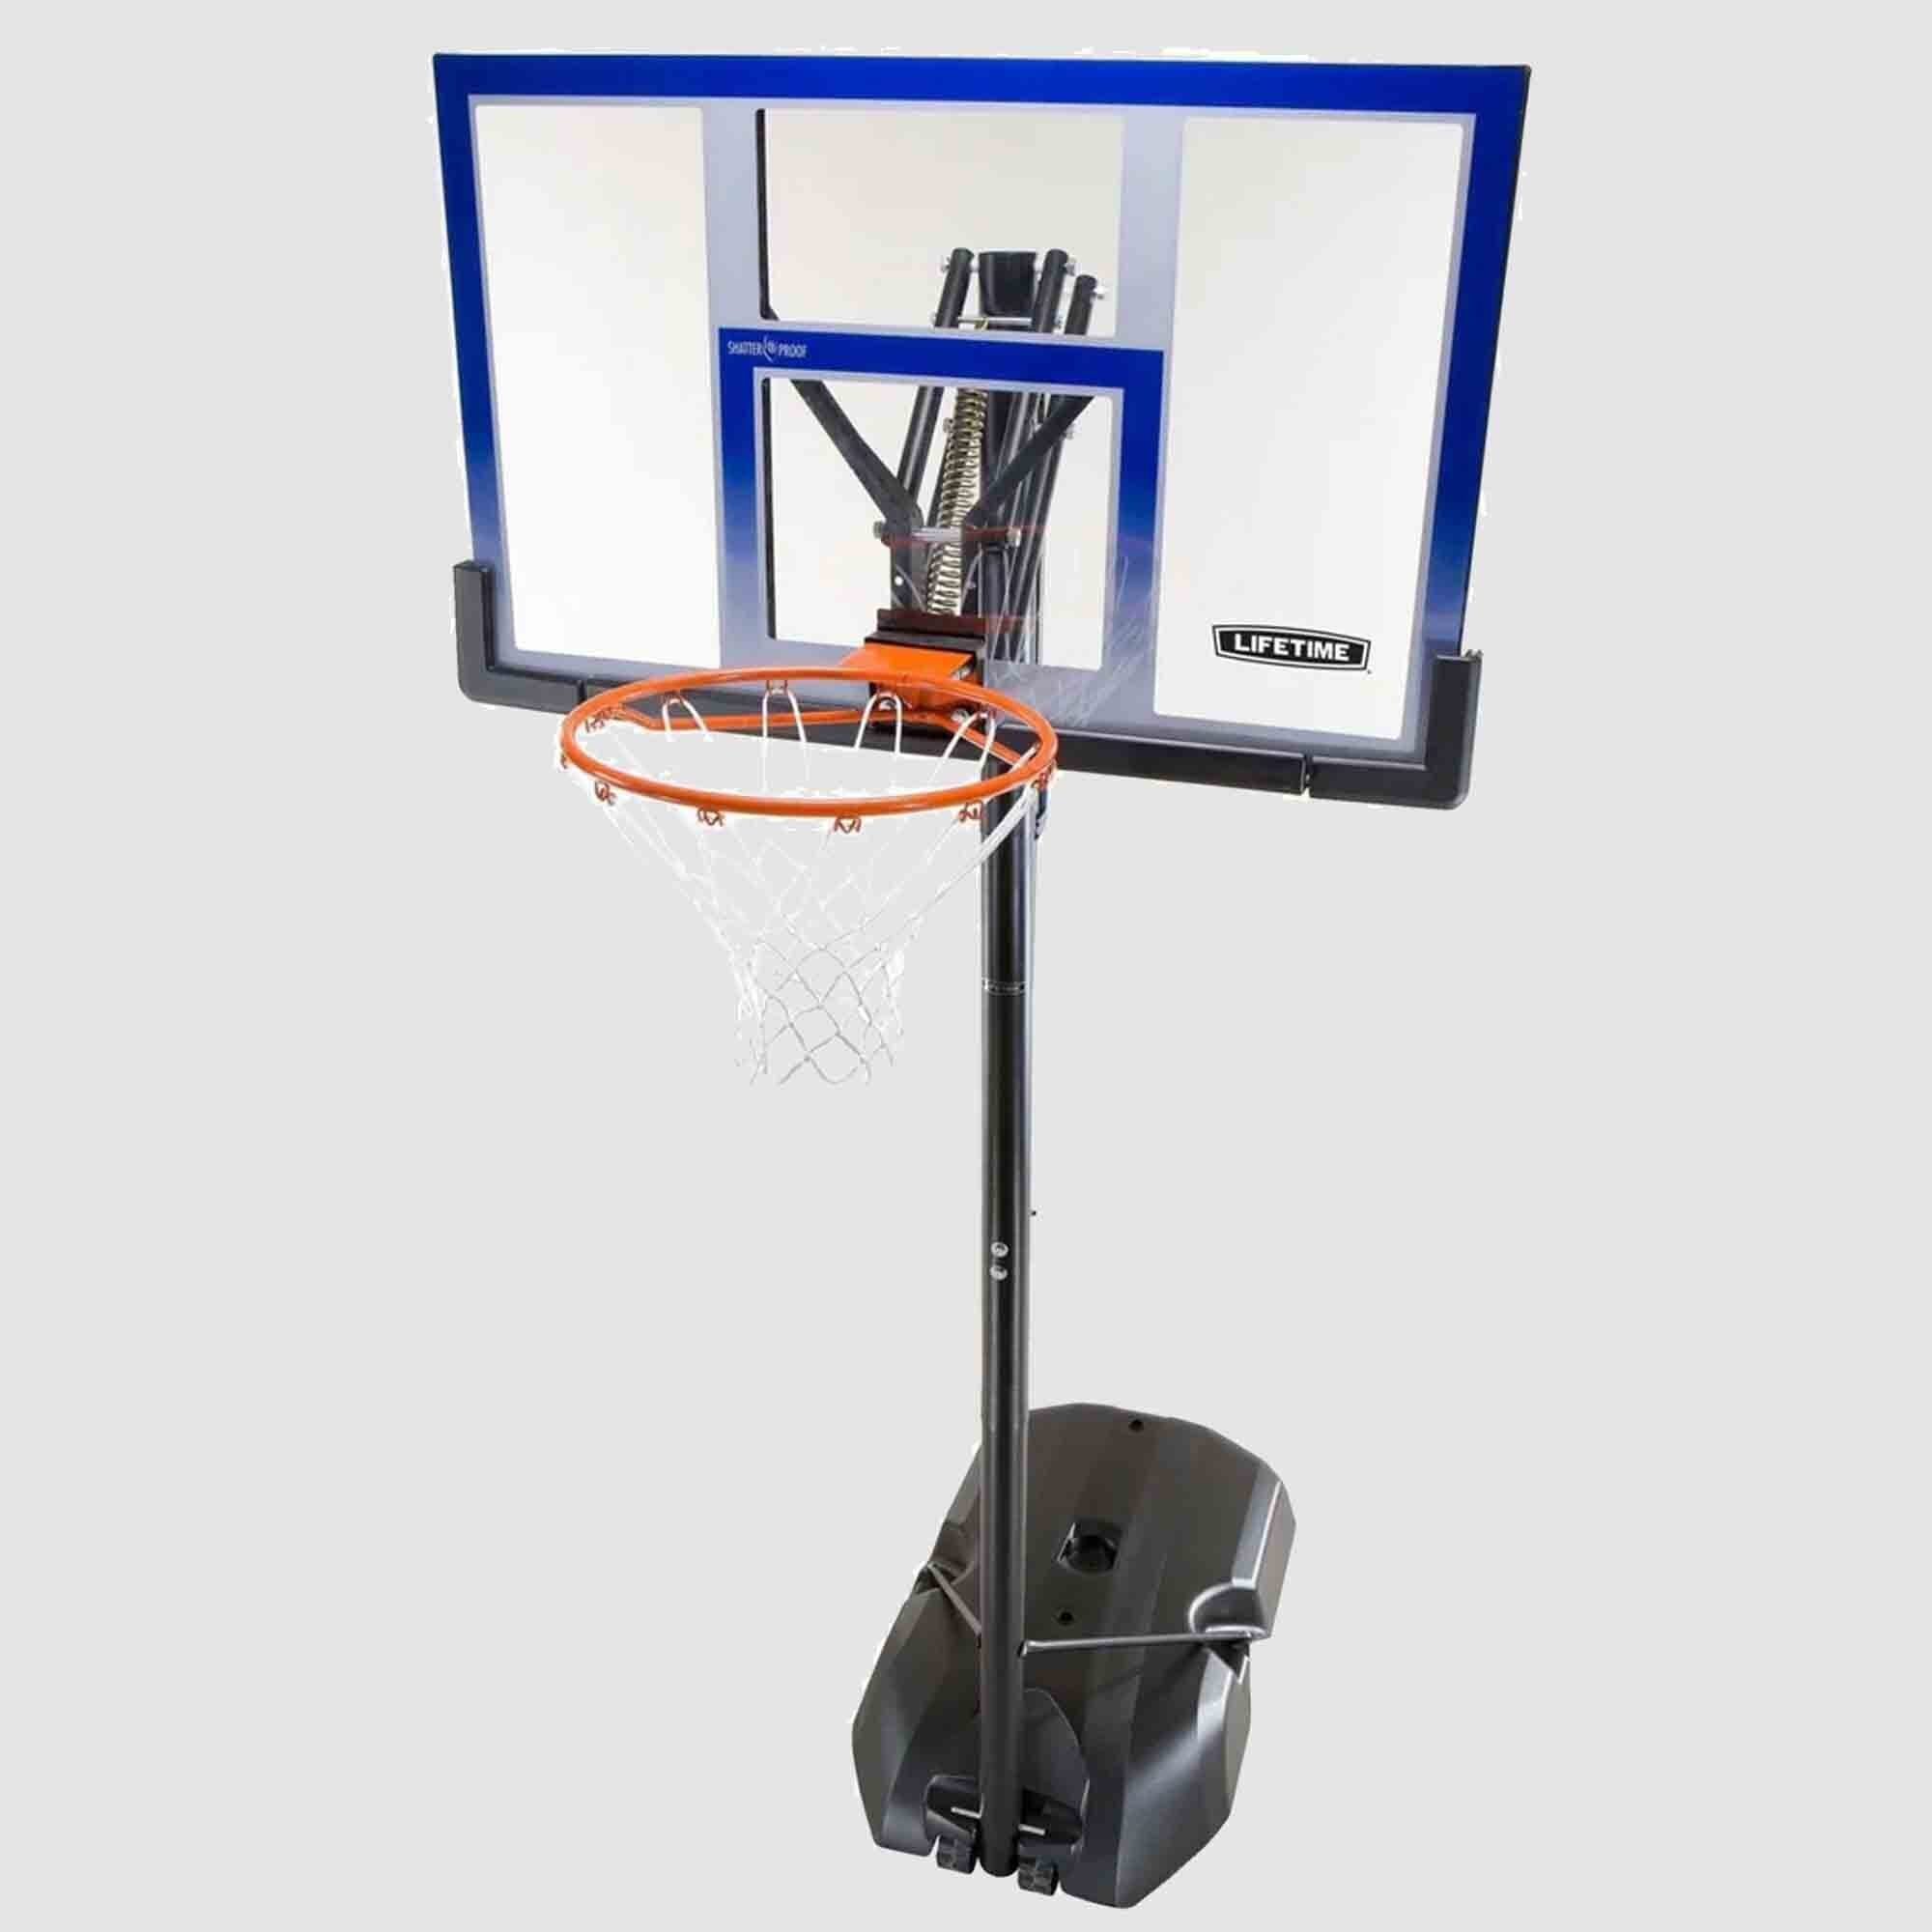 Lifetime Crossover Basketball Goal System 48 Inch